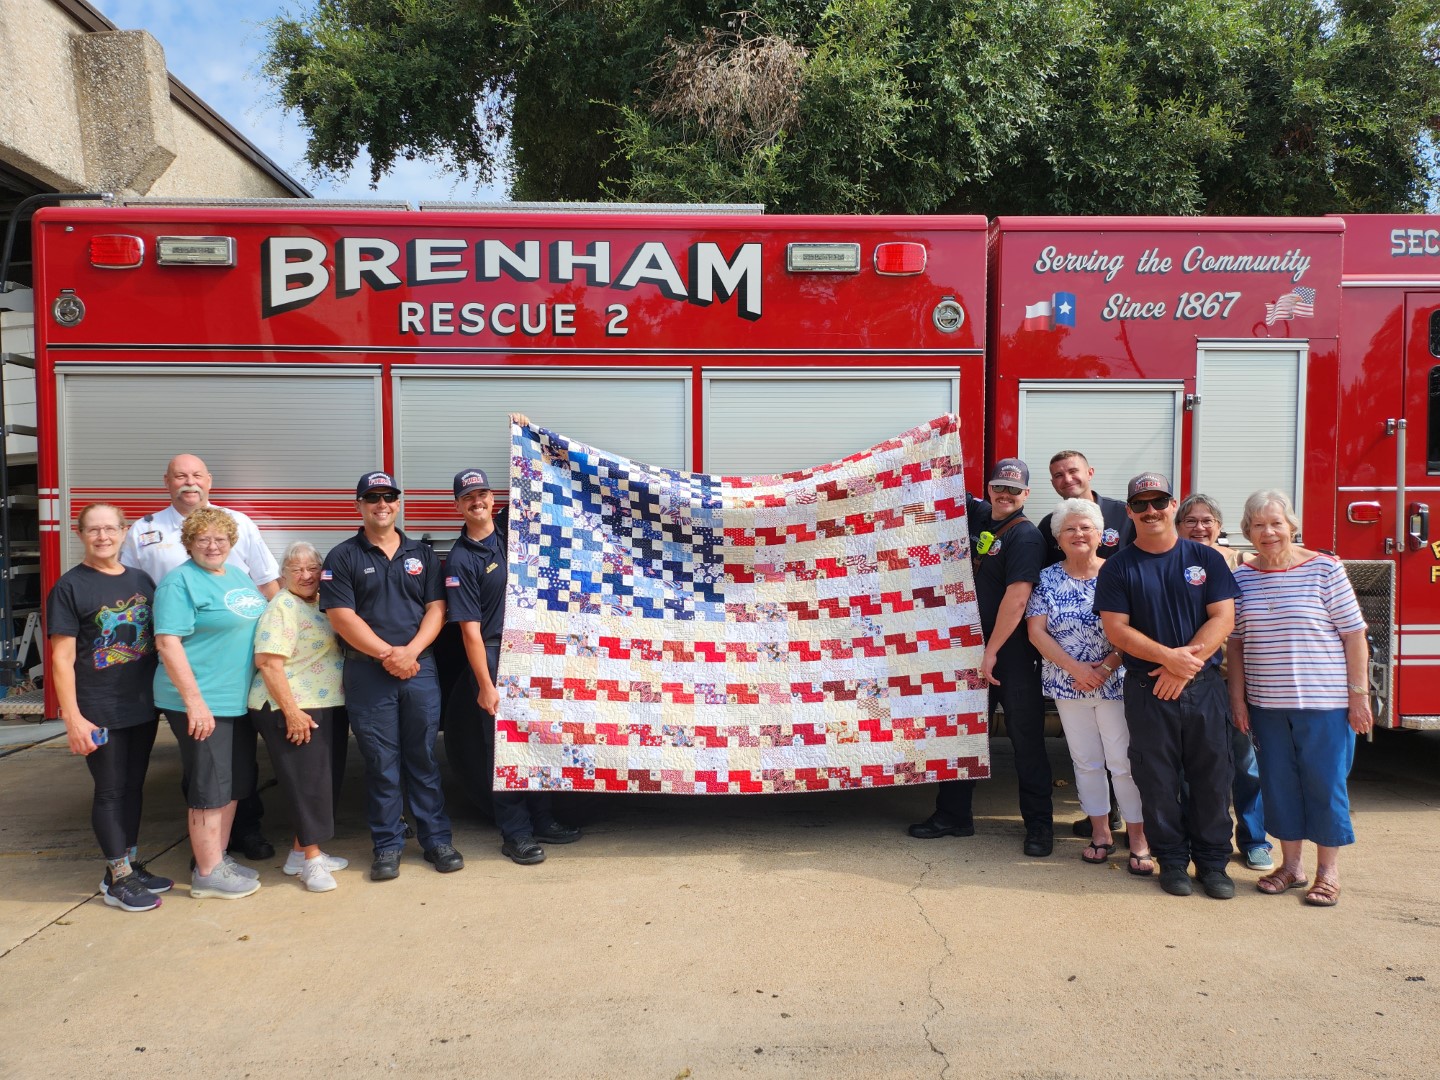 group of quilters and fire fighters standing in front of a fire truck, holding up a quilt that looks like the American stars and stripes flag